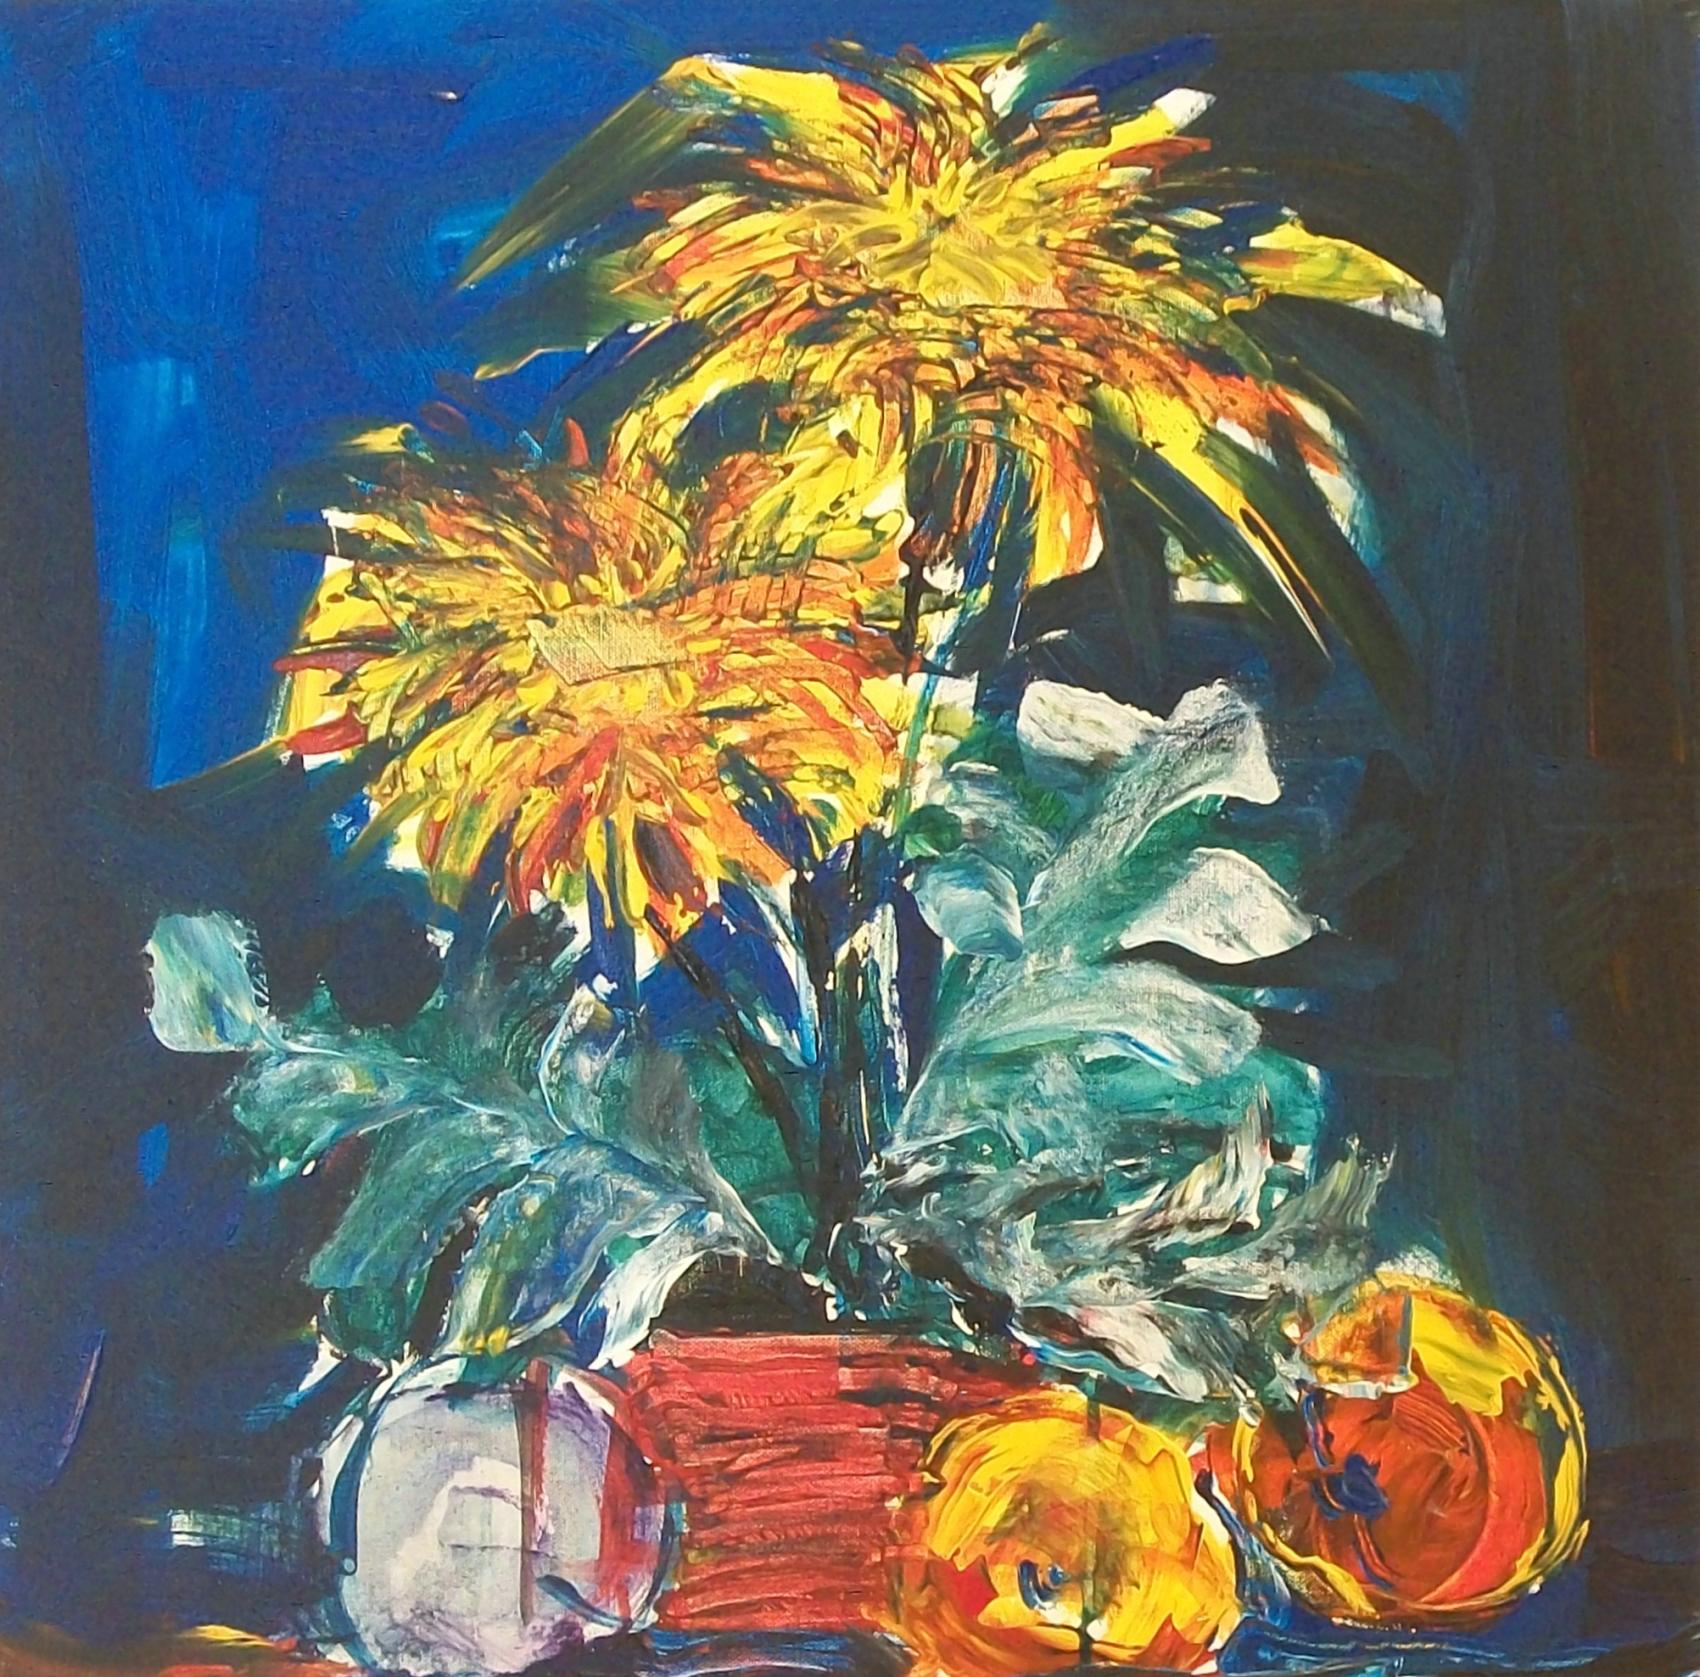 MICHAEL BLAZEK - #15 - Expressionist floral still life acrylic painting on canvas - featuring areas of heavy impasto - signed on the side - Canada (Chatham, Ontario) - circa 2015.

Excellent vintage condition - no loss - no damage - no restoration